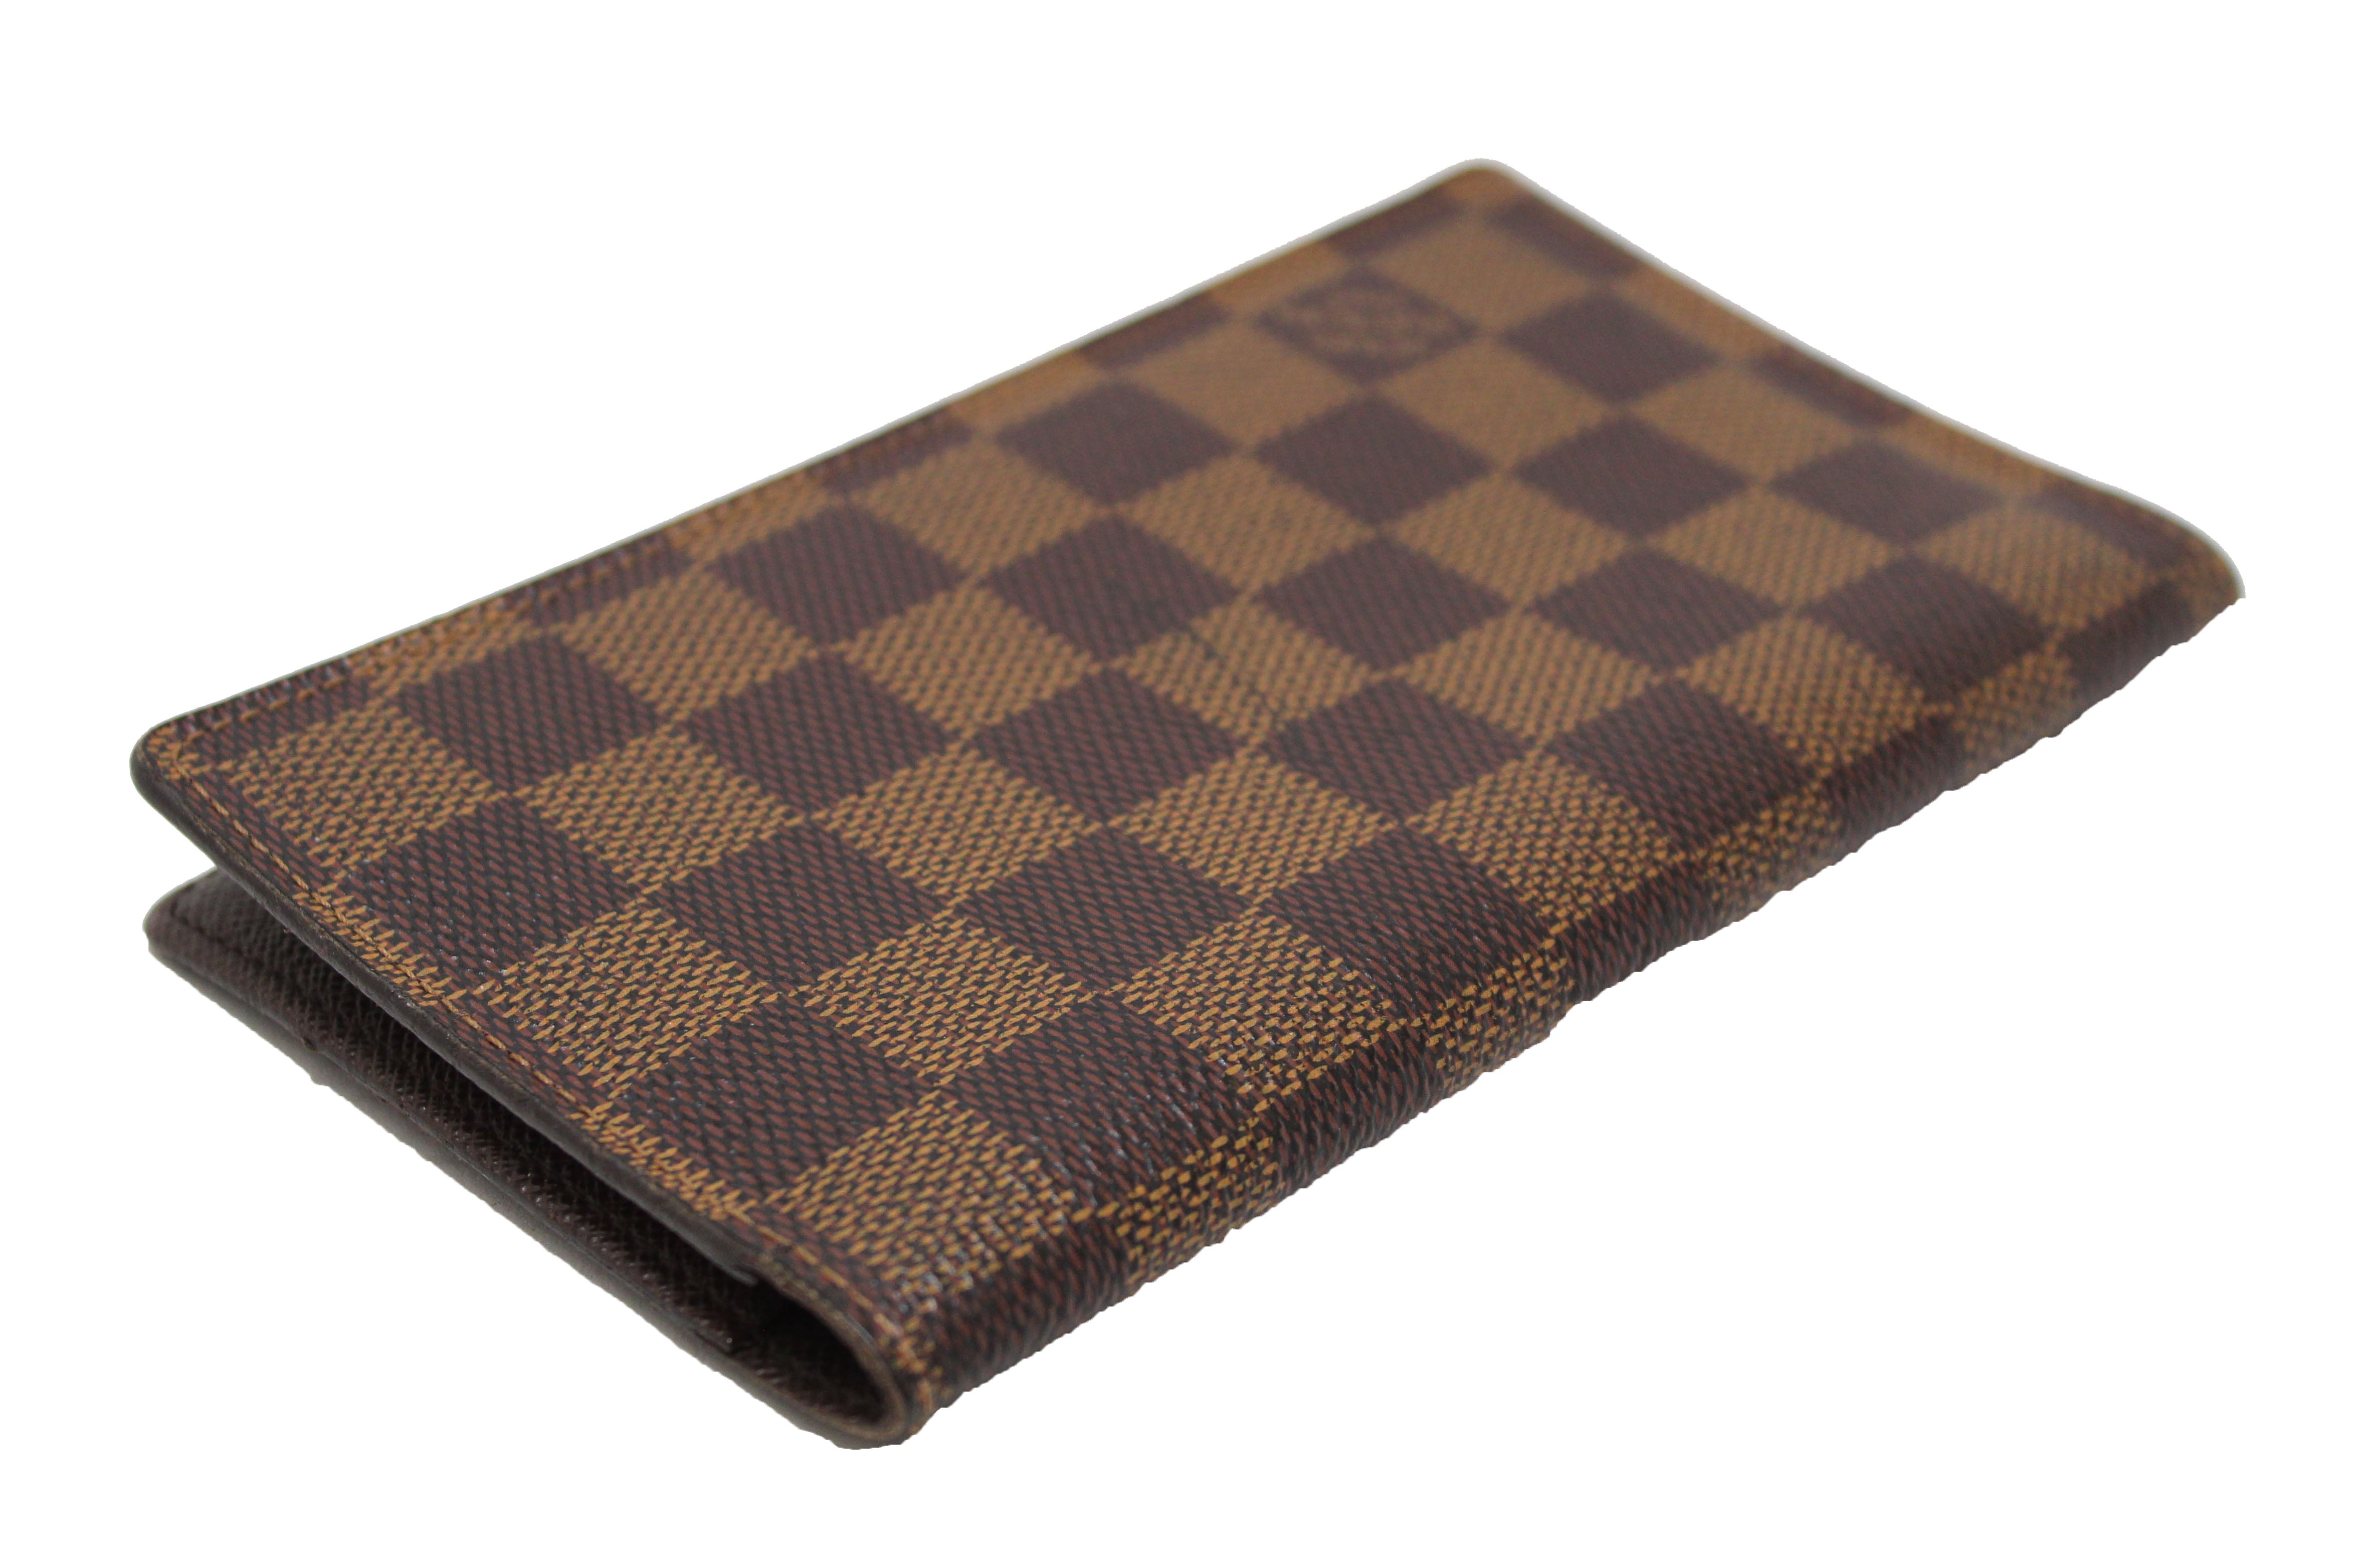 Used louis vuitton checkbook cover